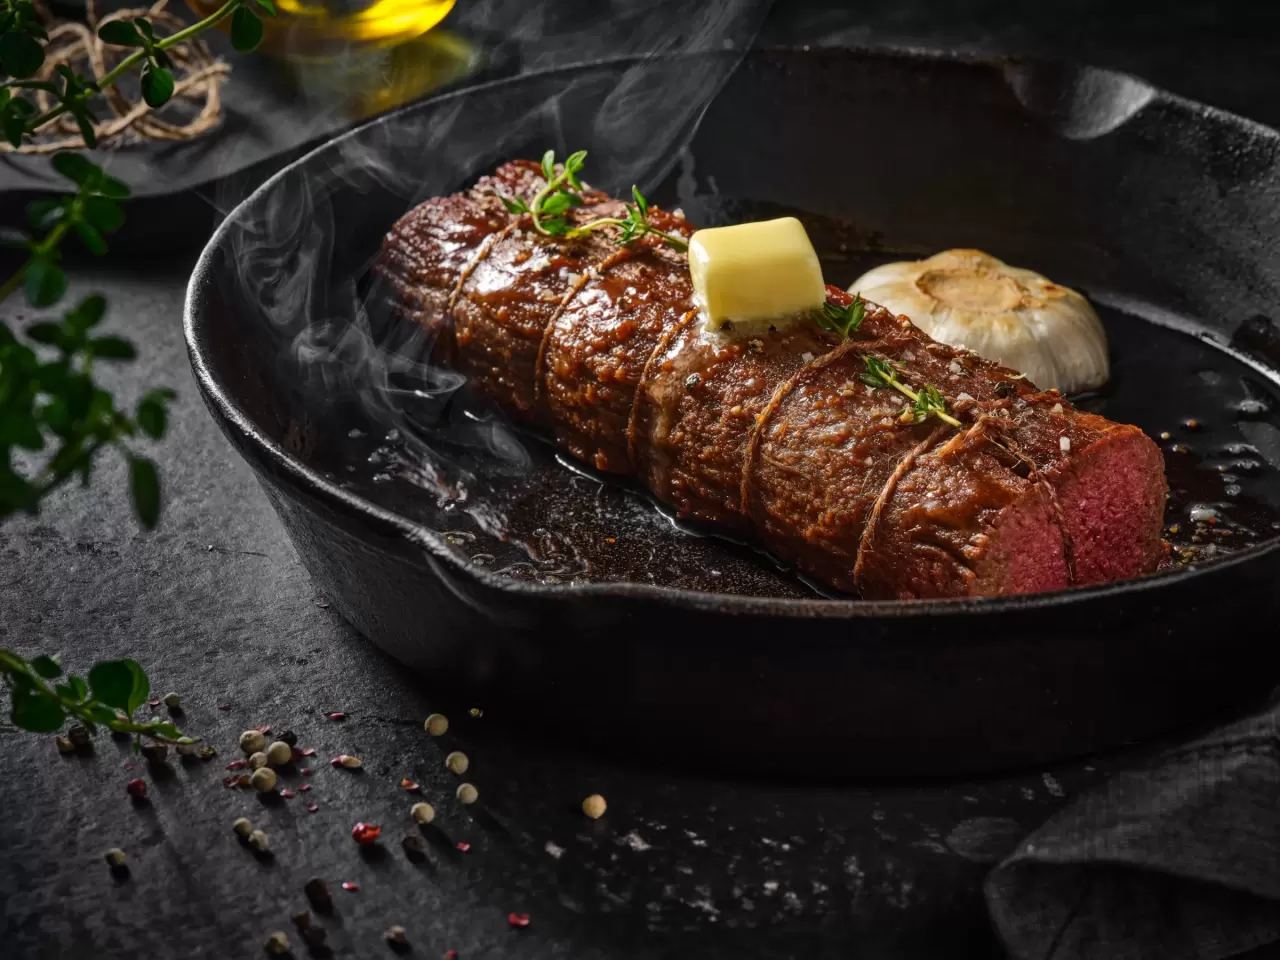 Redefine Meat unveils major New-Meat expansion with breakthrough premium cuts and first ever culinary-grade "Pulled Meat" category img#2